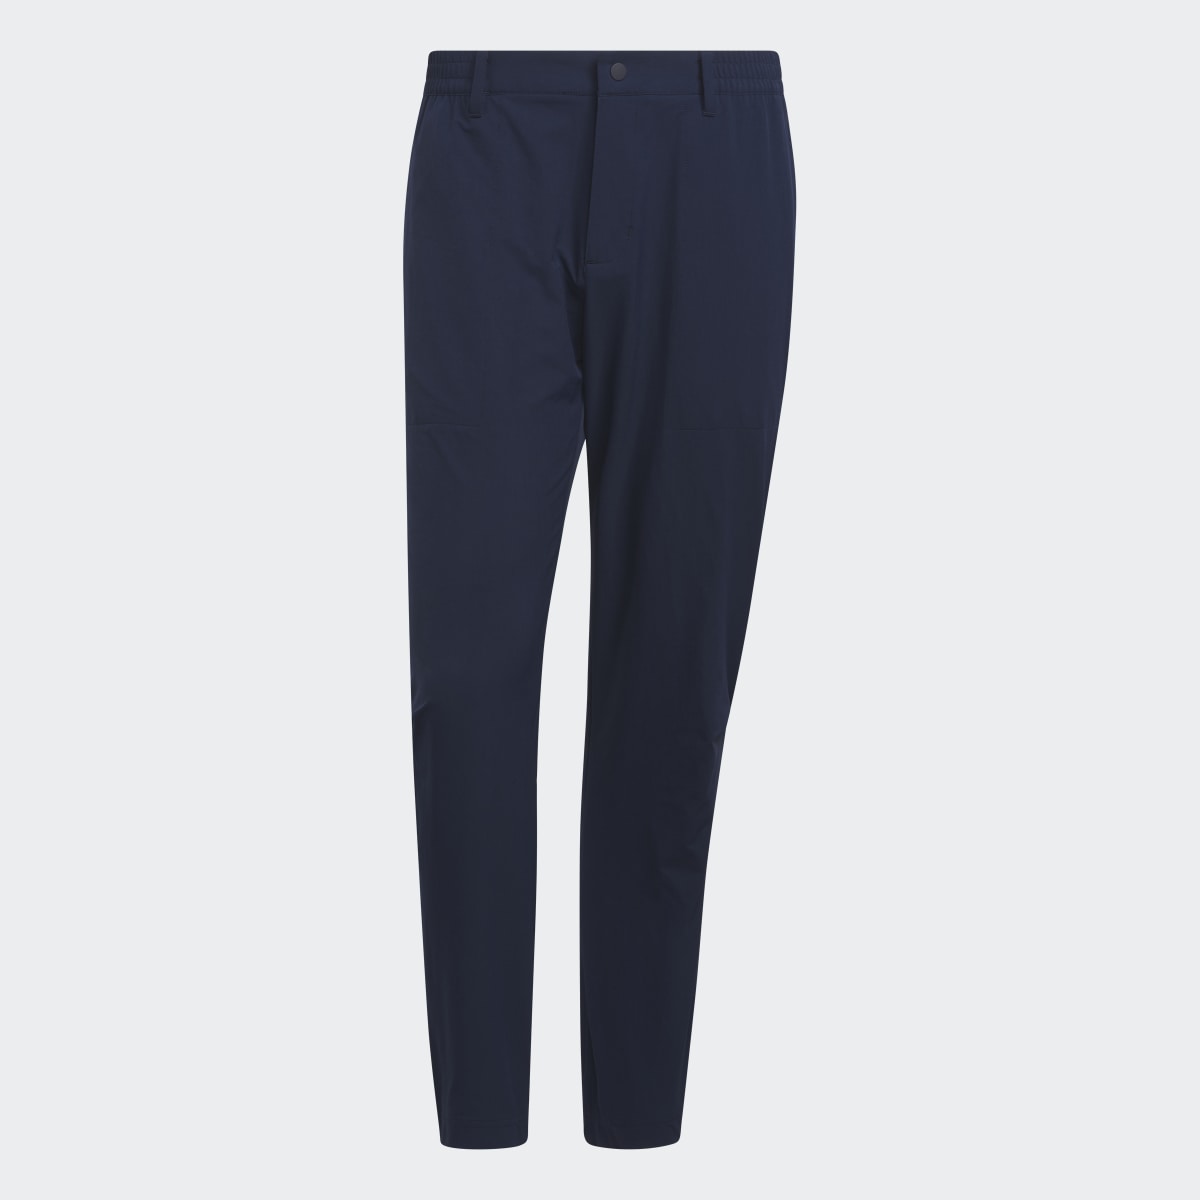 Adidas Go-To Commuter Pants. 4